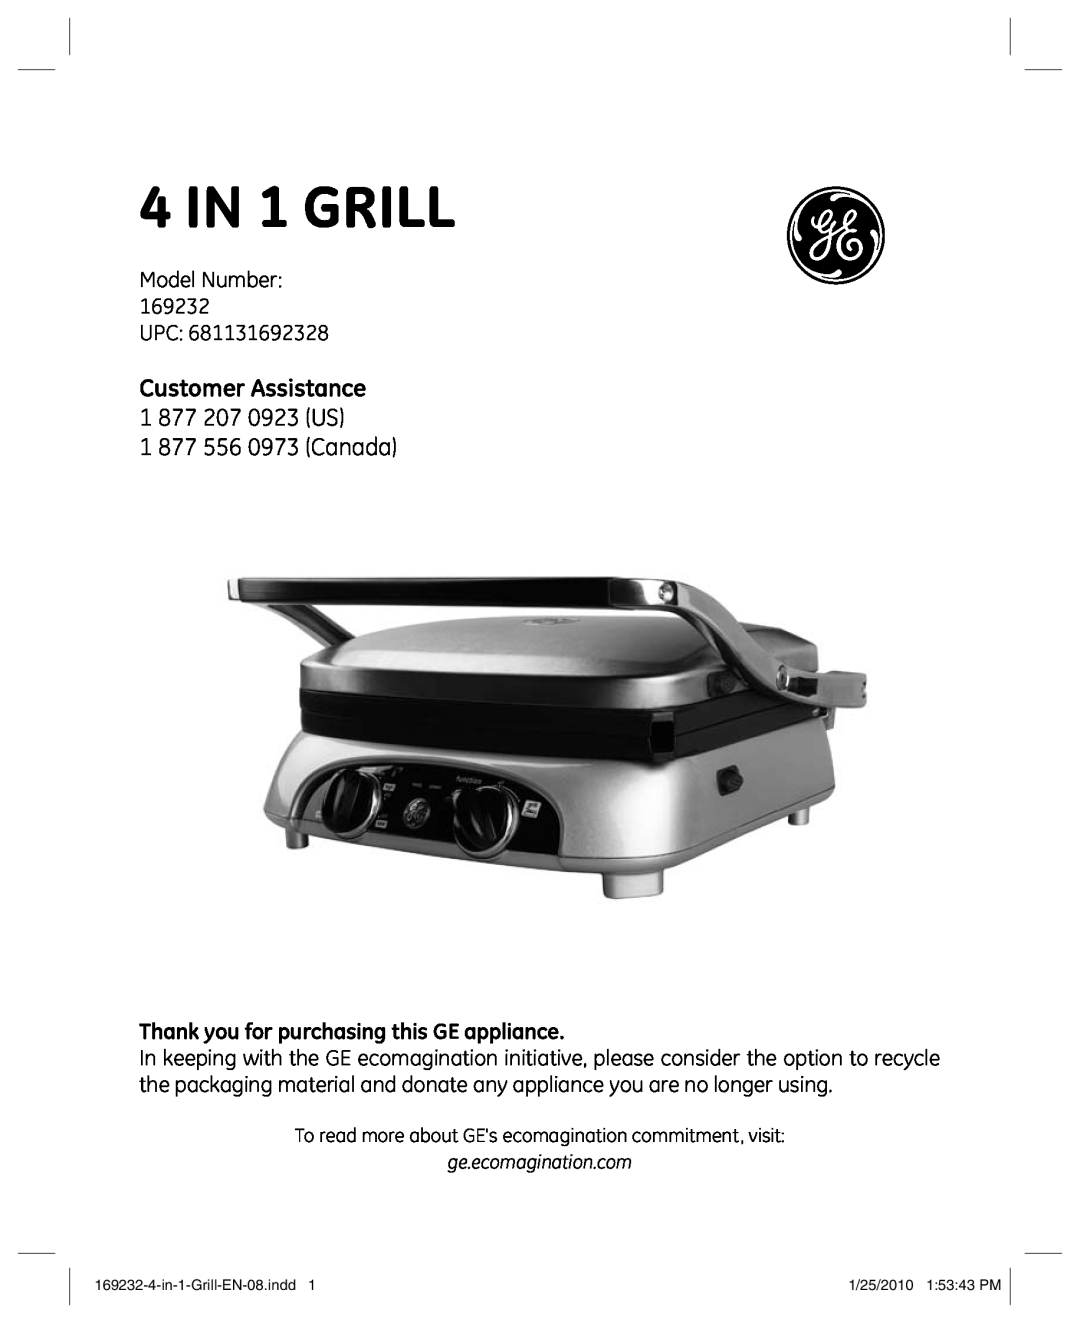 GE 681131692328 manual Customer Assistance 1 877 207 0923 US, Thank you for purchasing this GE appliance, 4 in 1 grill 